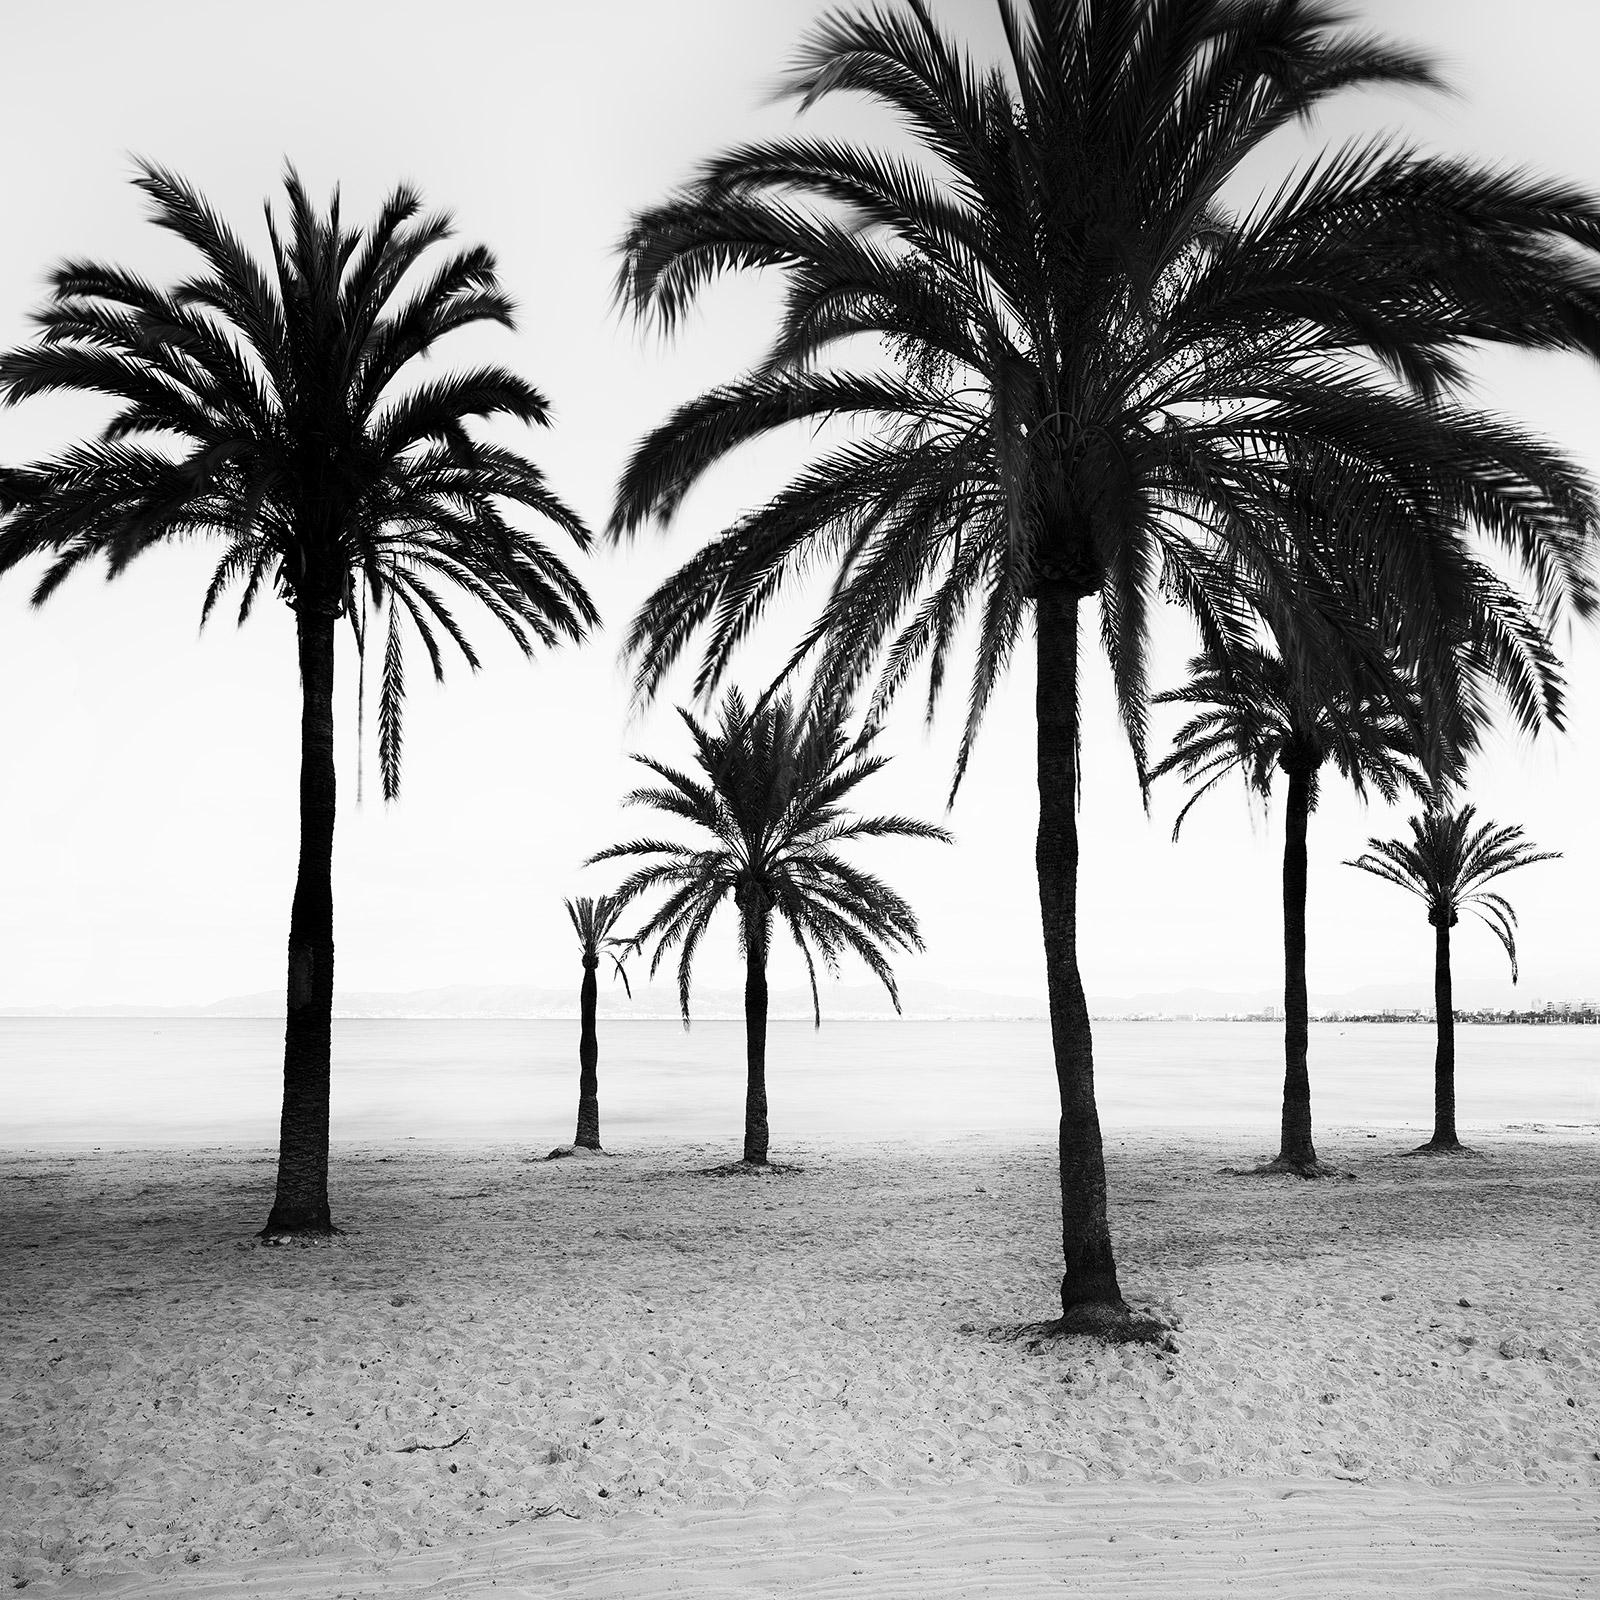 Gerald Berghammer Black and White Photograph - Palm Trees at the Beach, Mallorca, black and white photography, art landscape